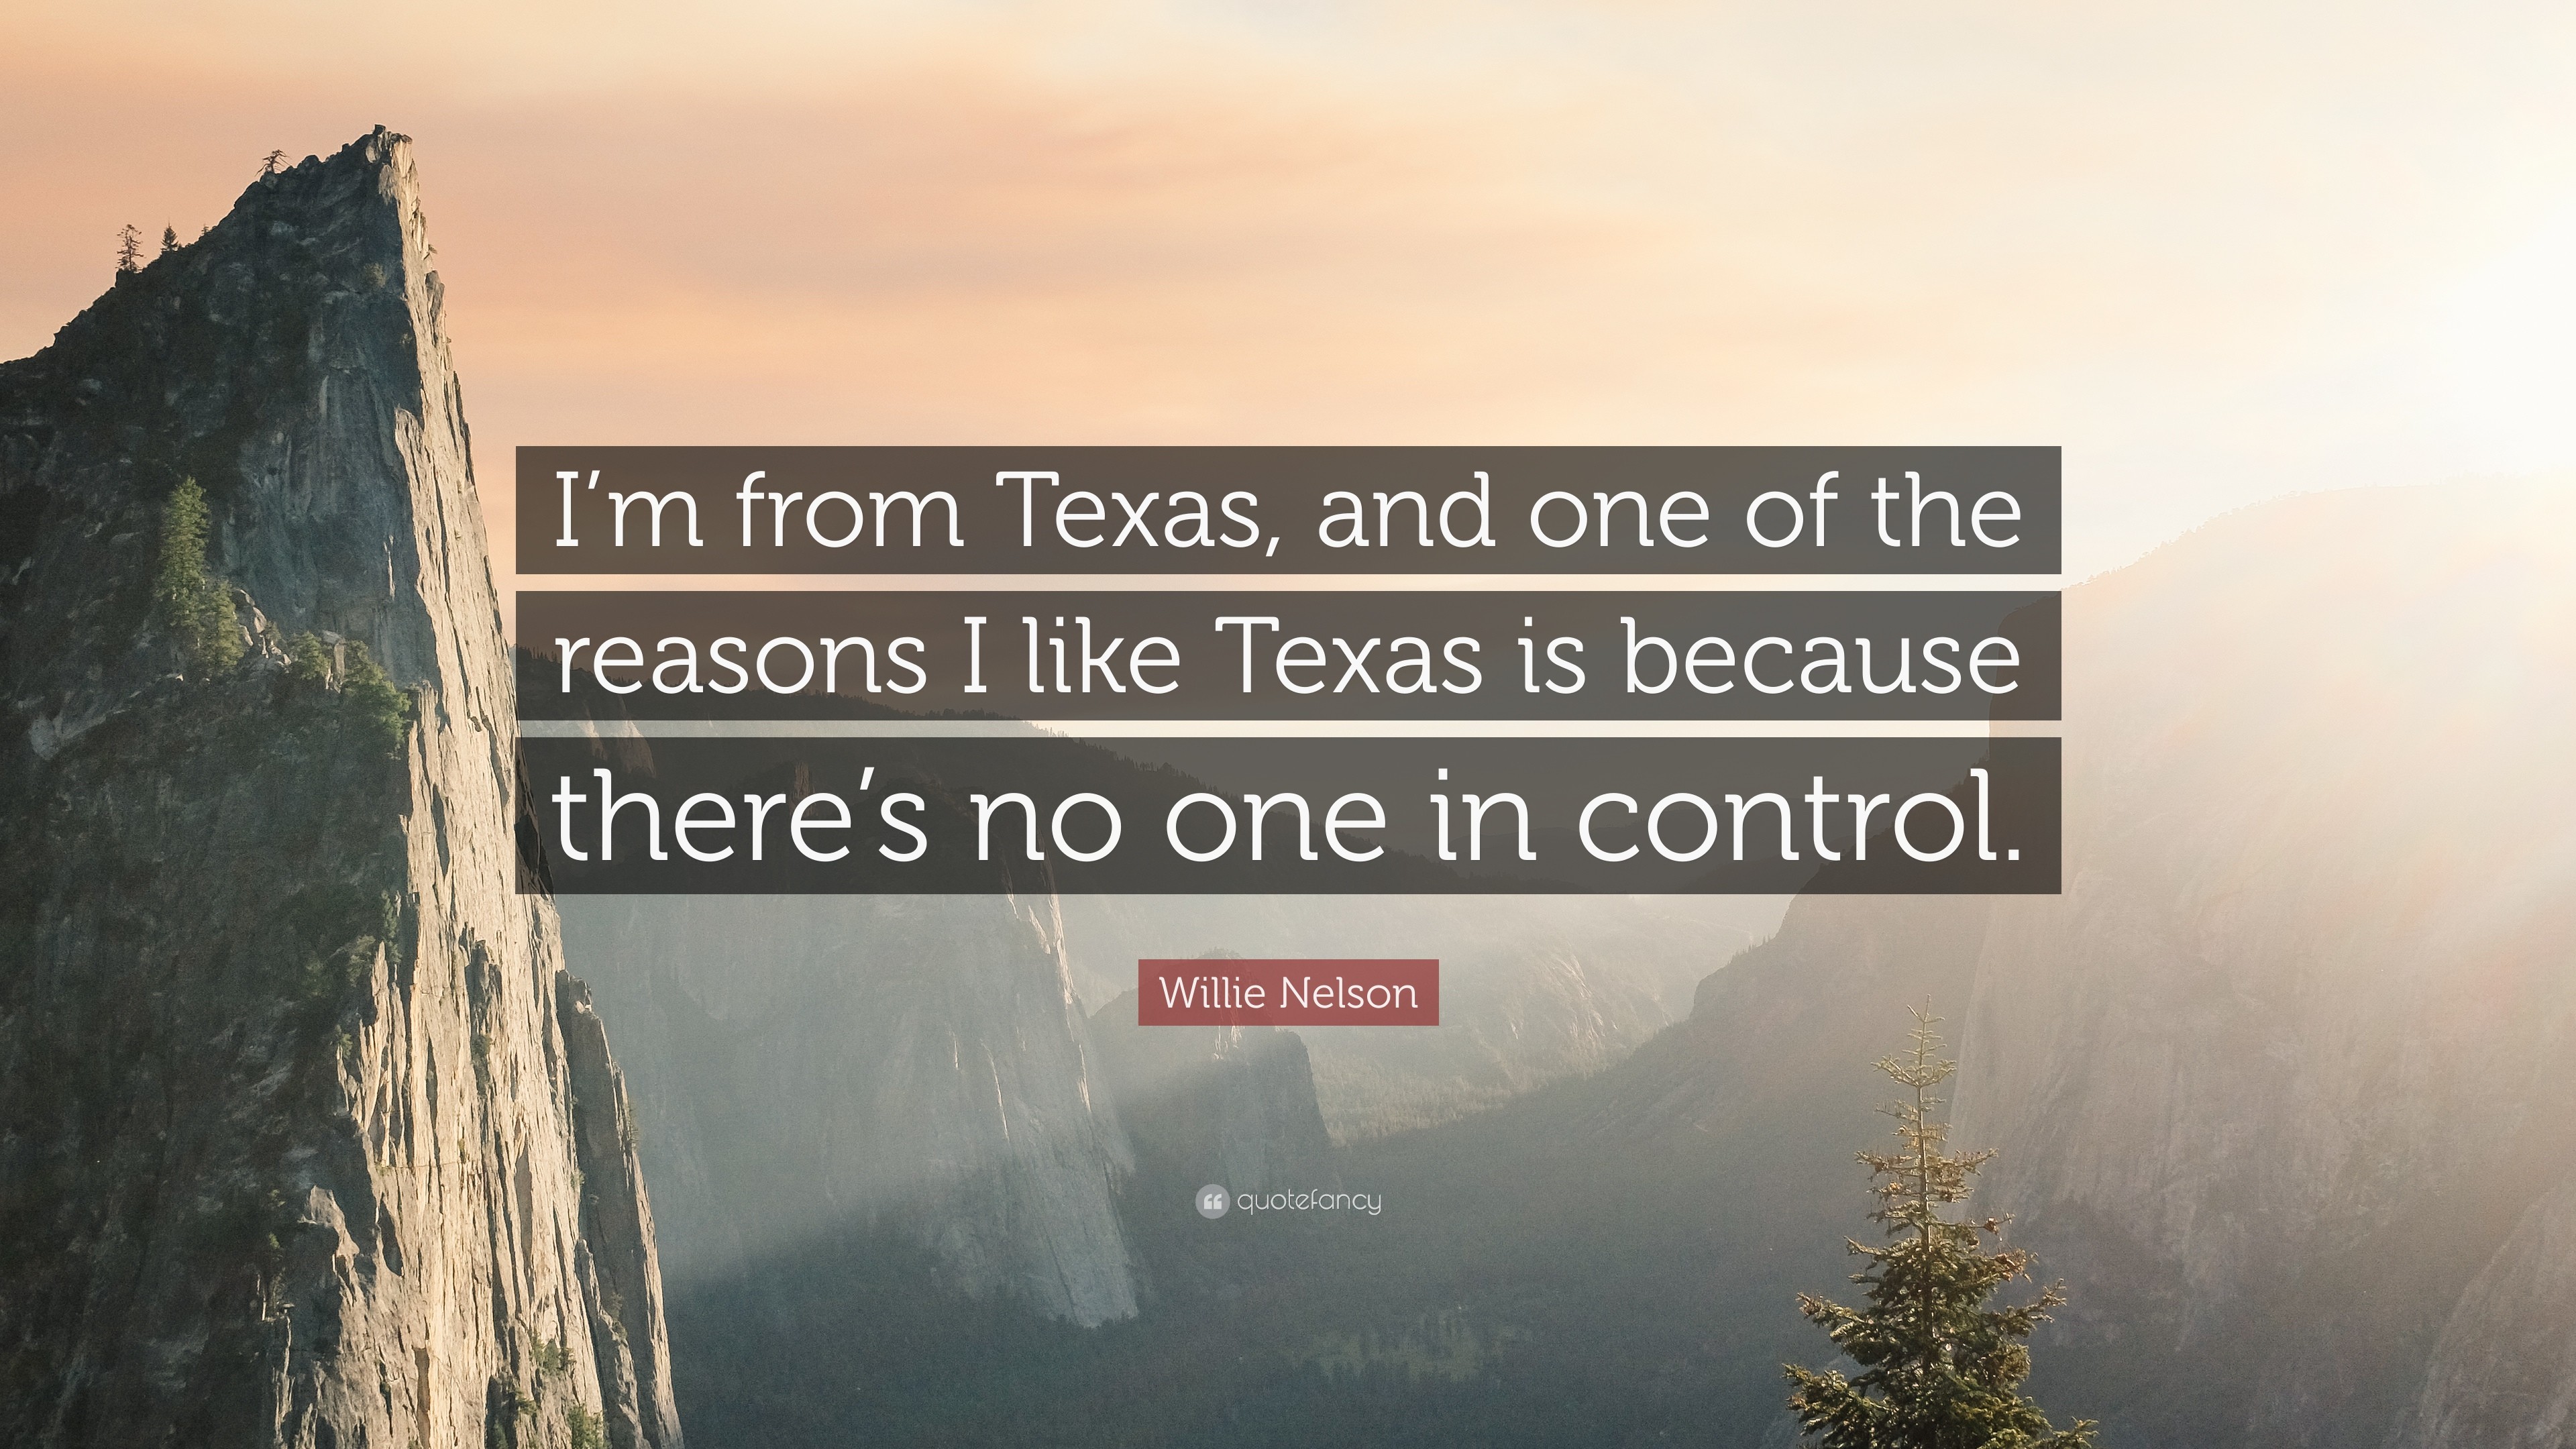 3840x2160 Willie Nelson Quote: “I'm from Texas, and one of the reasons